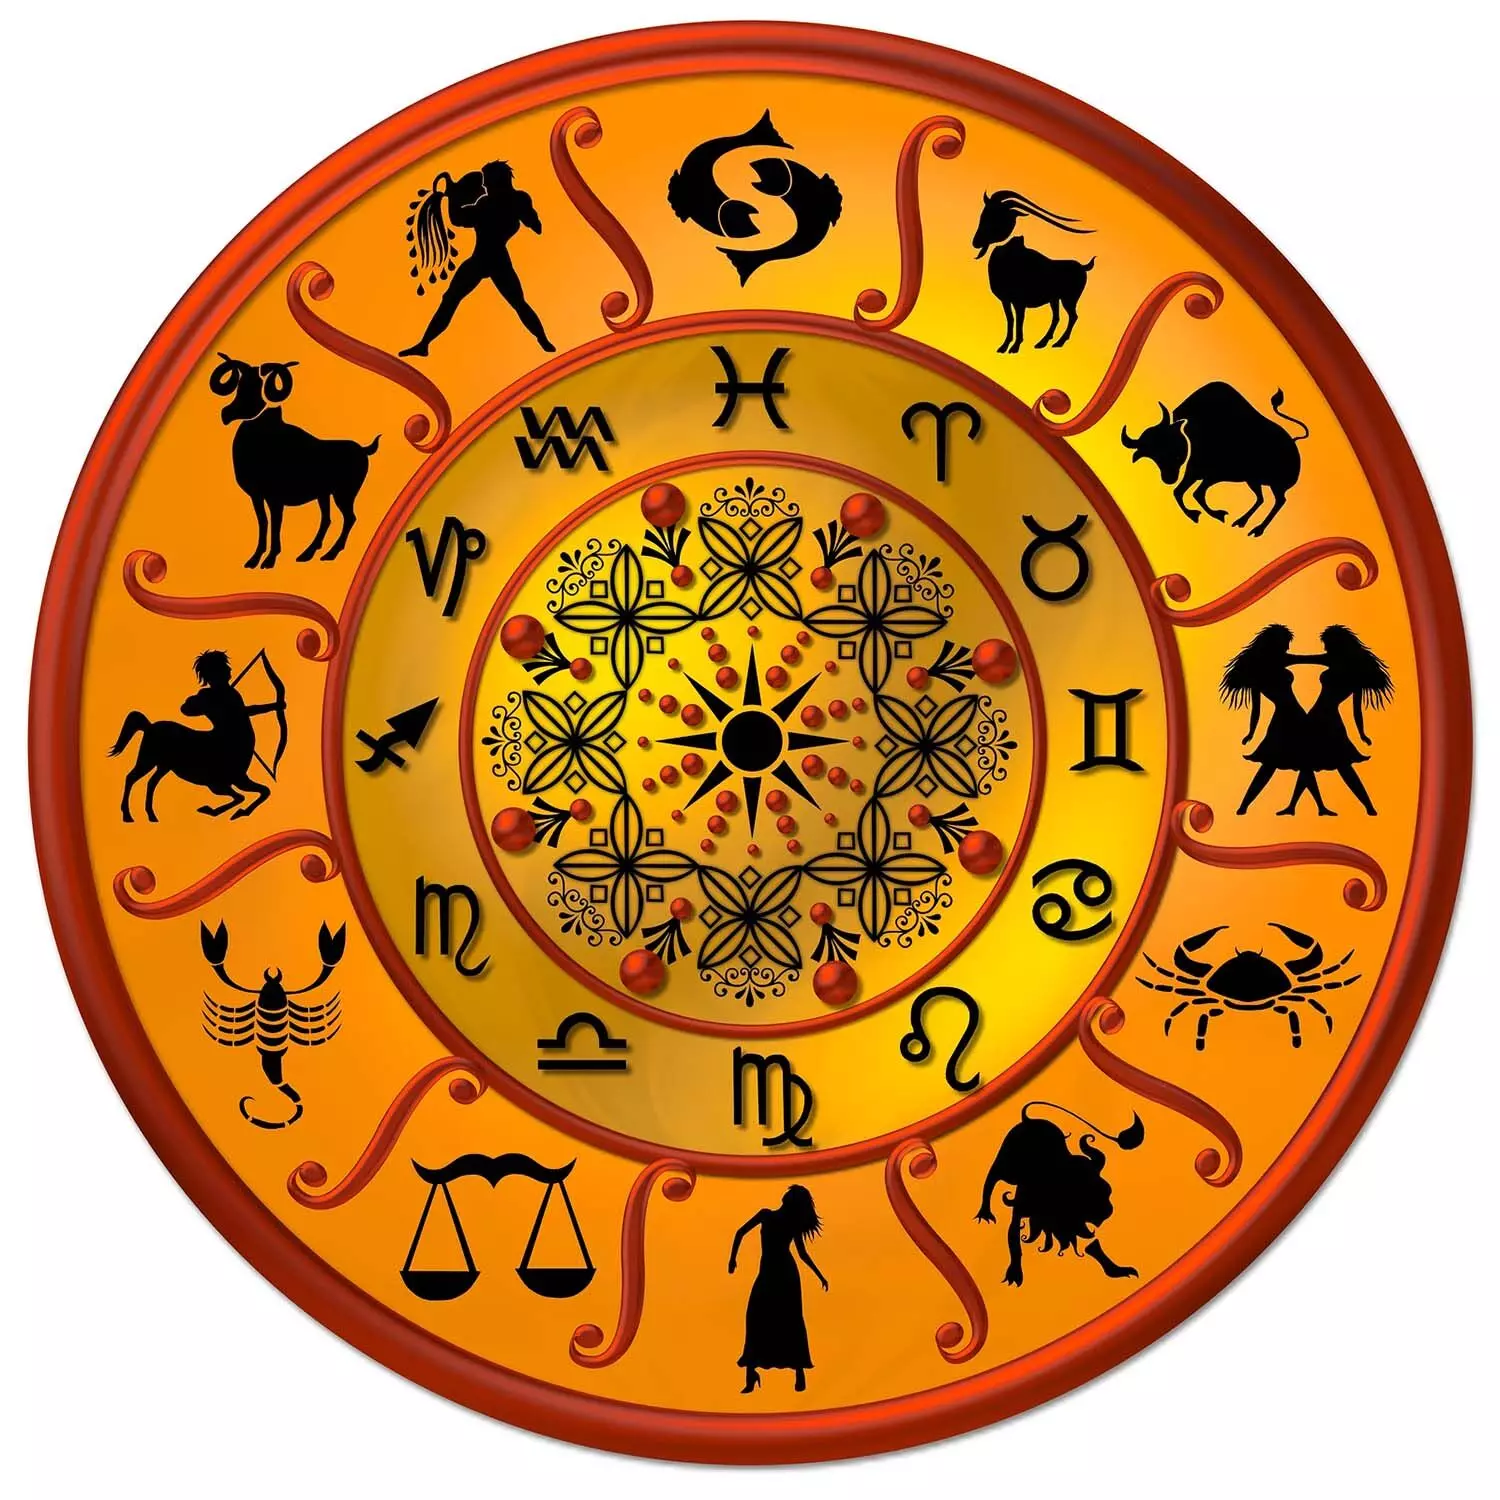 20 July – Know your todays horoscope